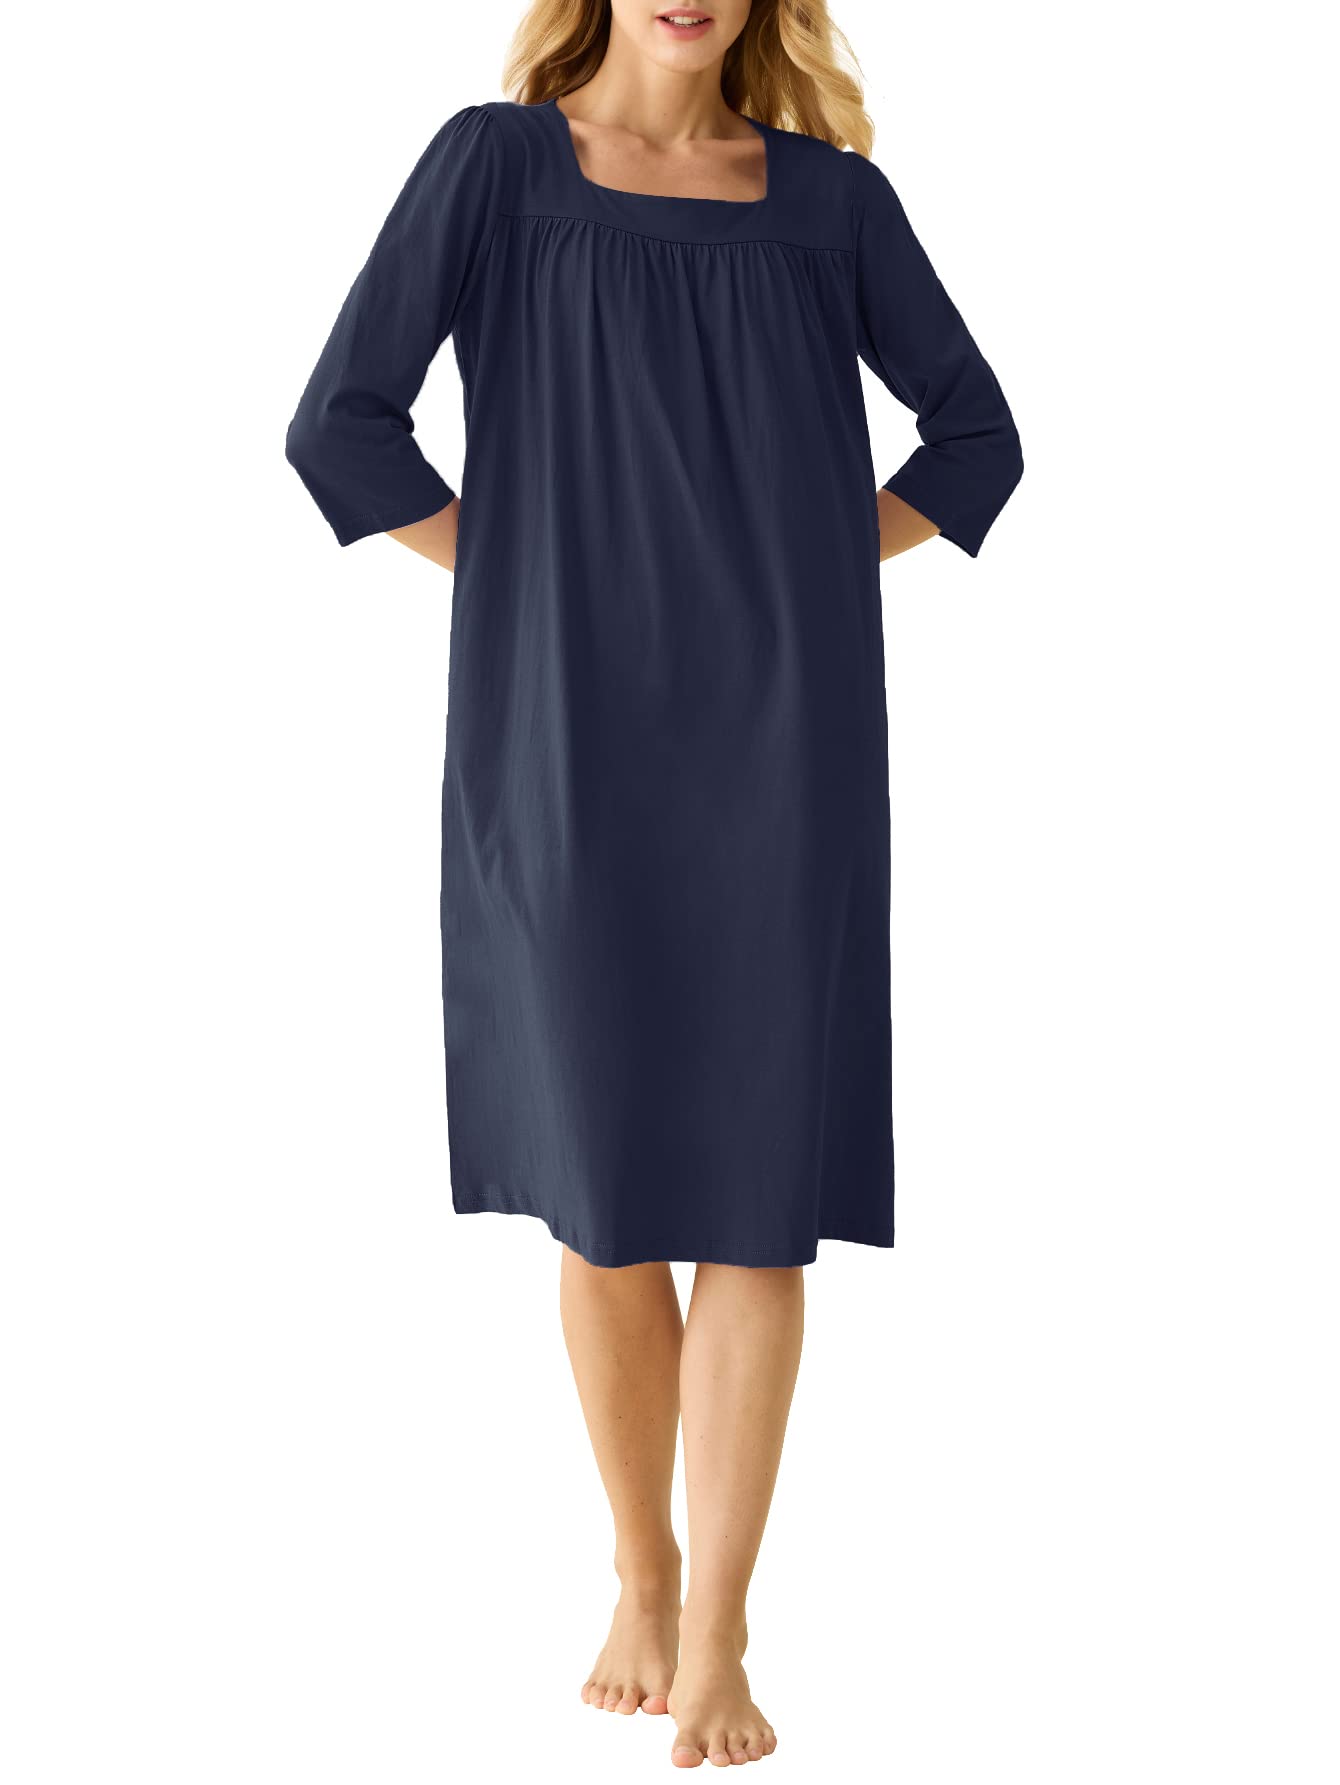 Comfortable cheap cotton nightgowns In Various Designs 